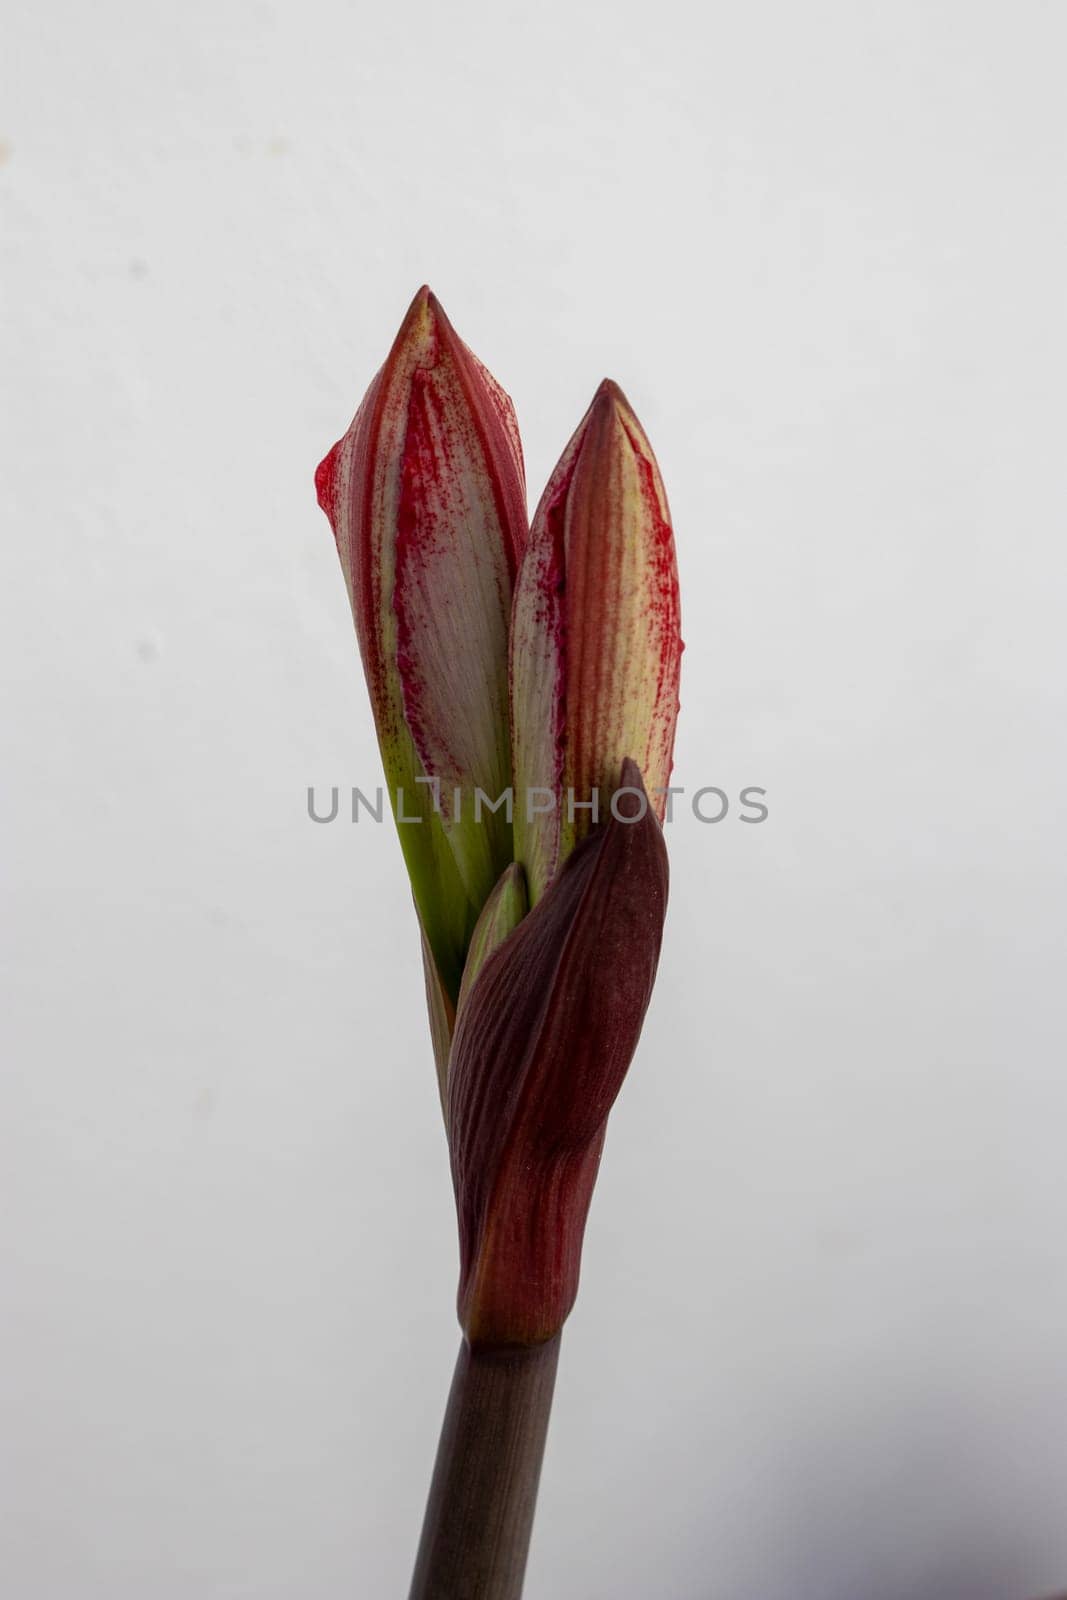 amaryllis flower about to open by Fran71